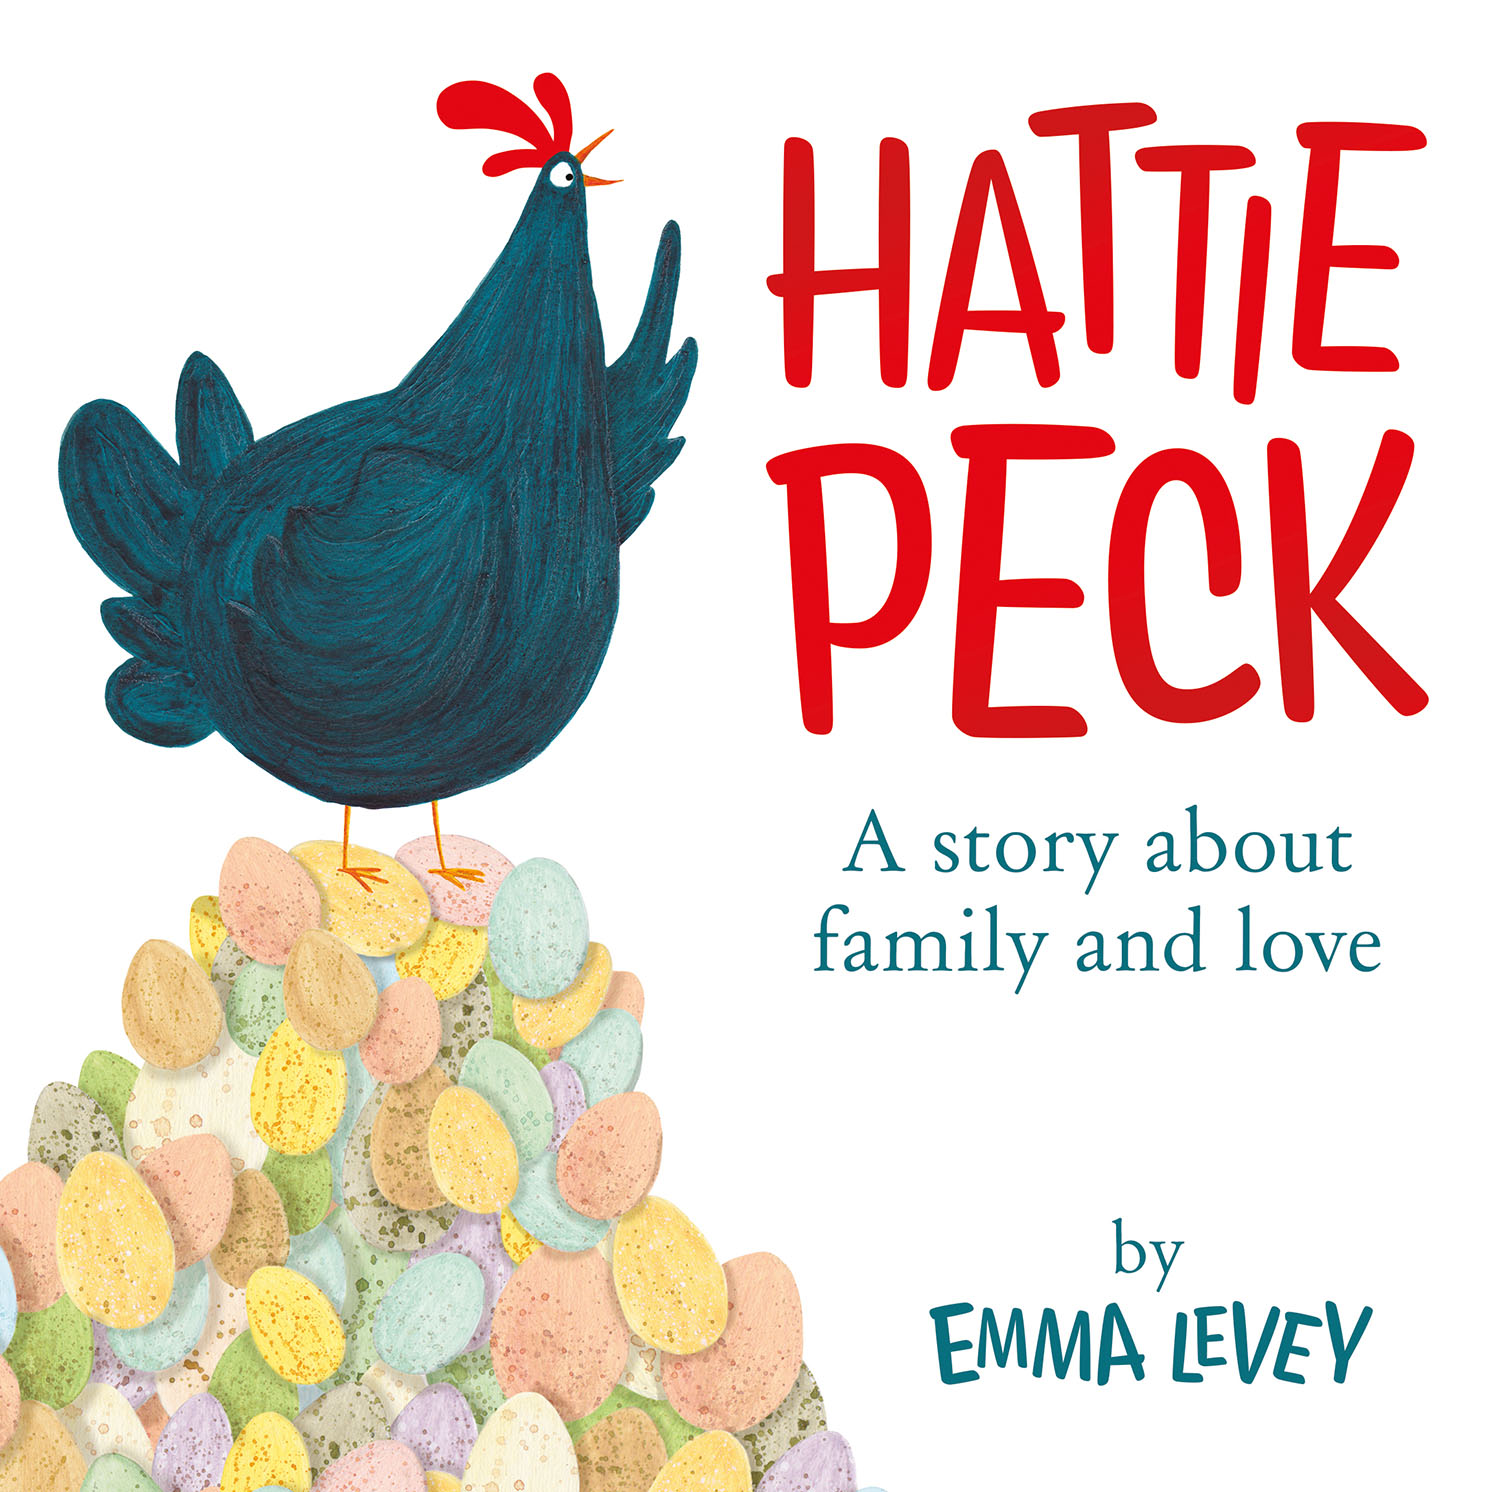 HATTIE PECK - A STORY ABOUT FAMILY AND LOVE